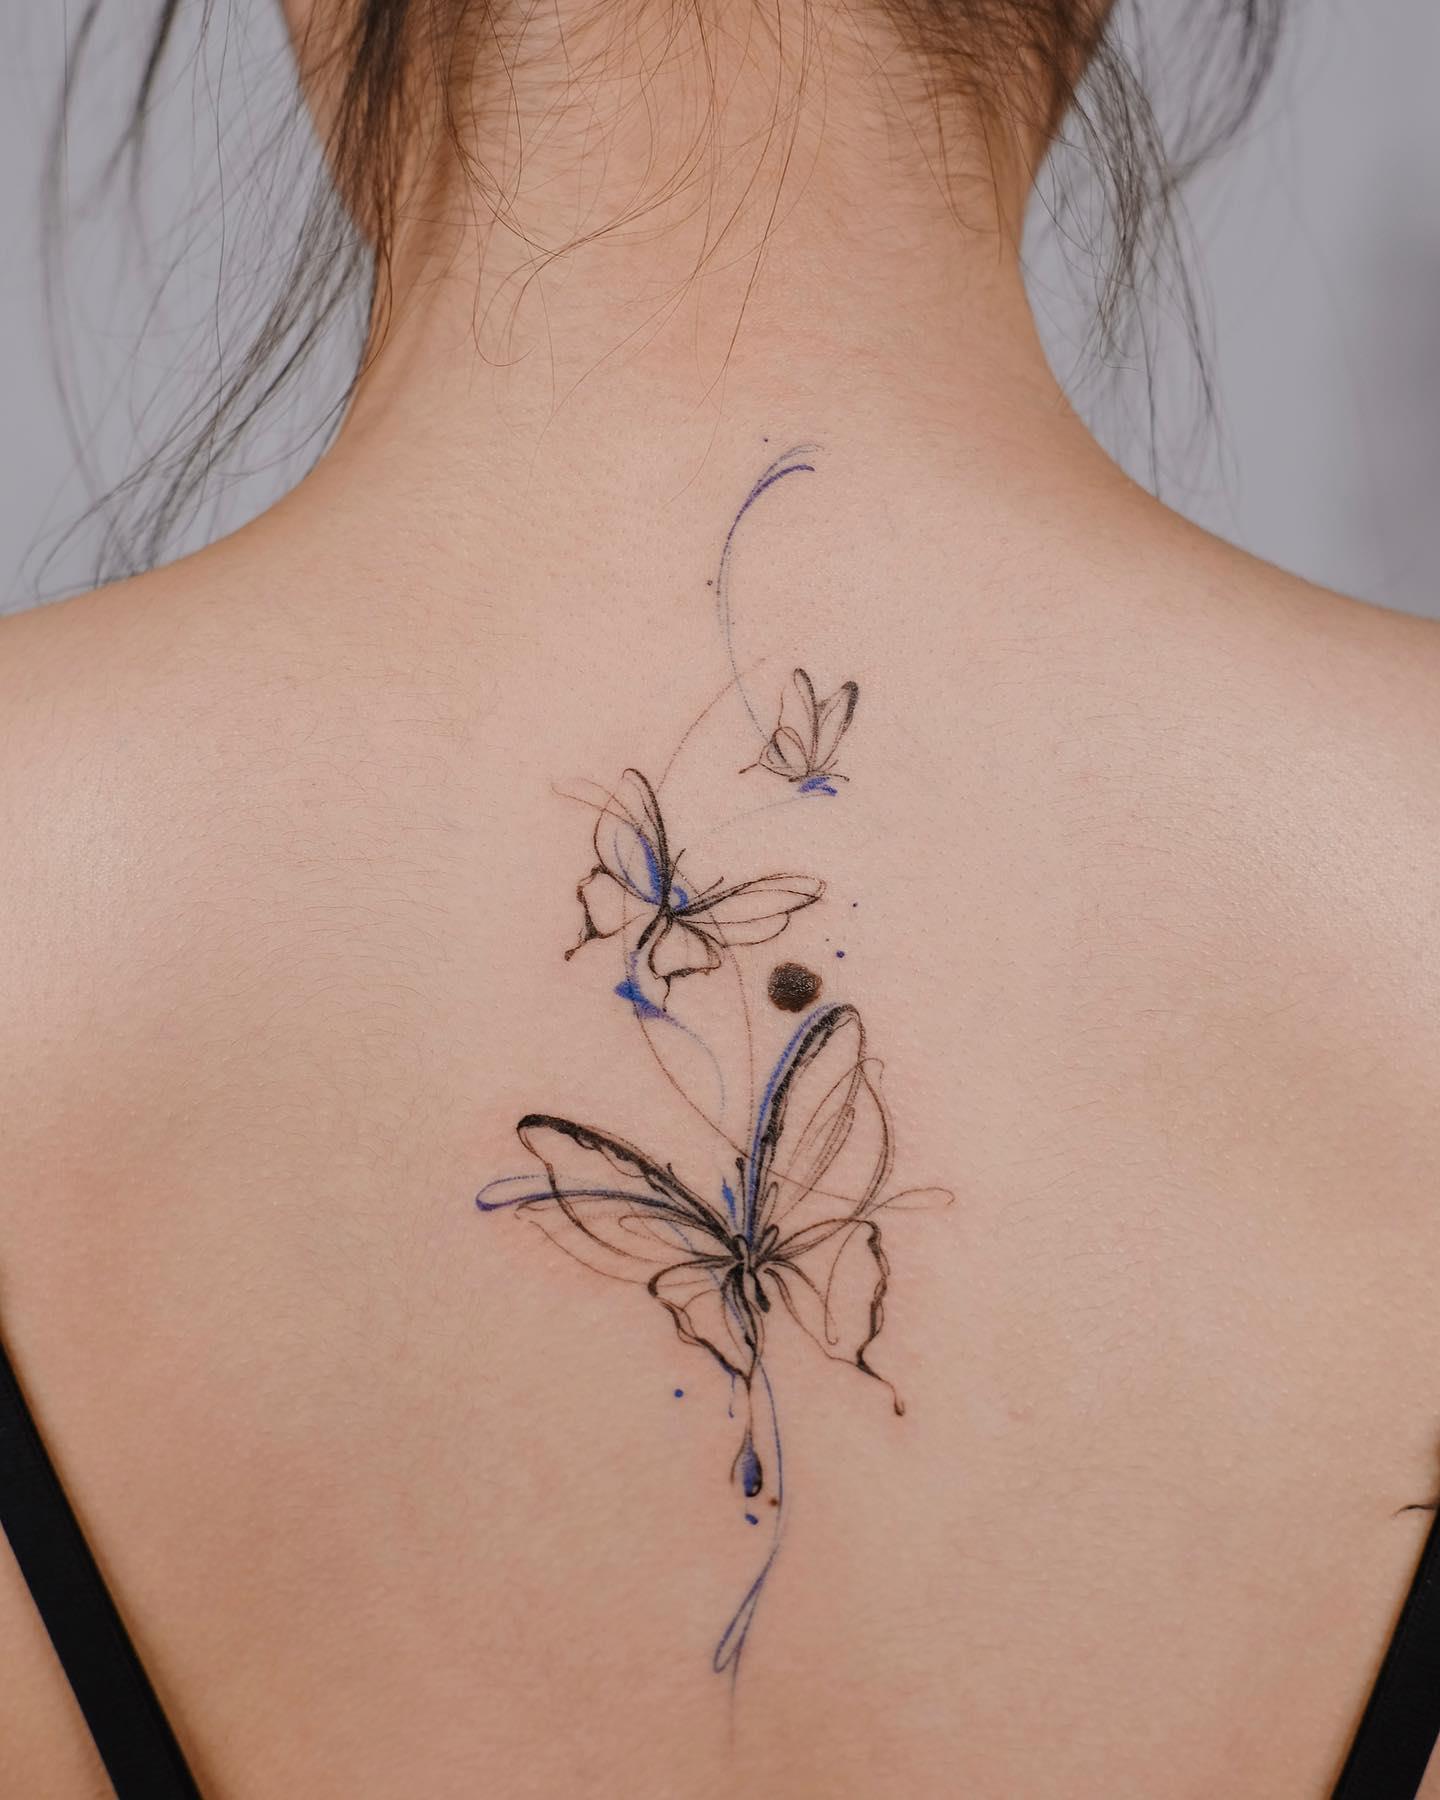 Cute tattoo designs for girls to get inspired